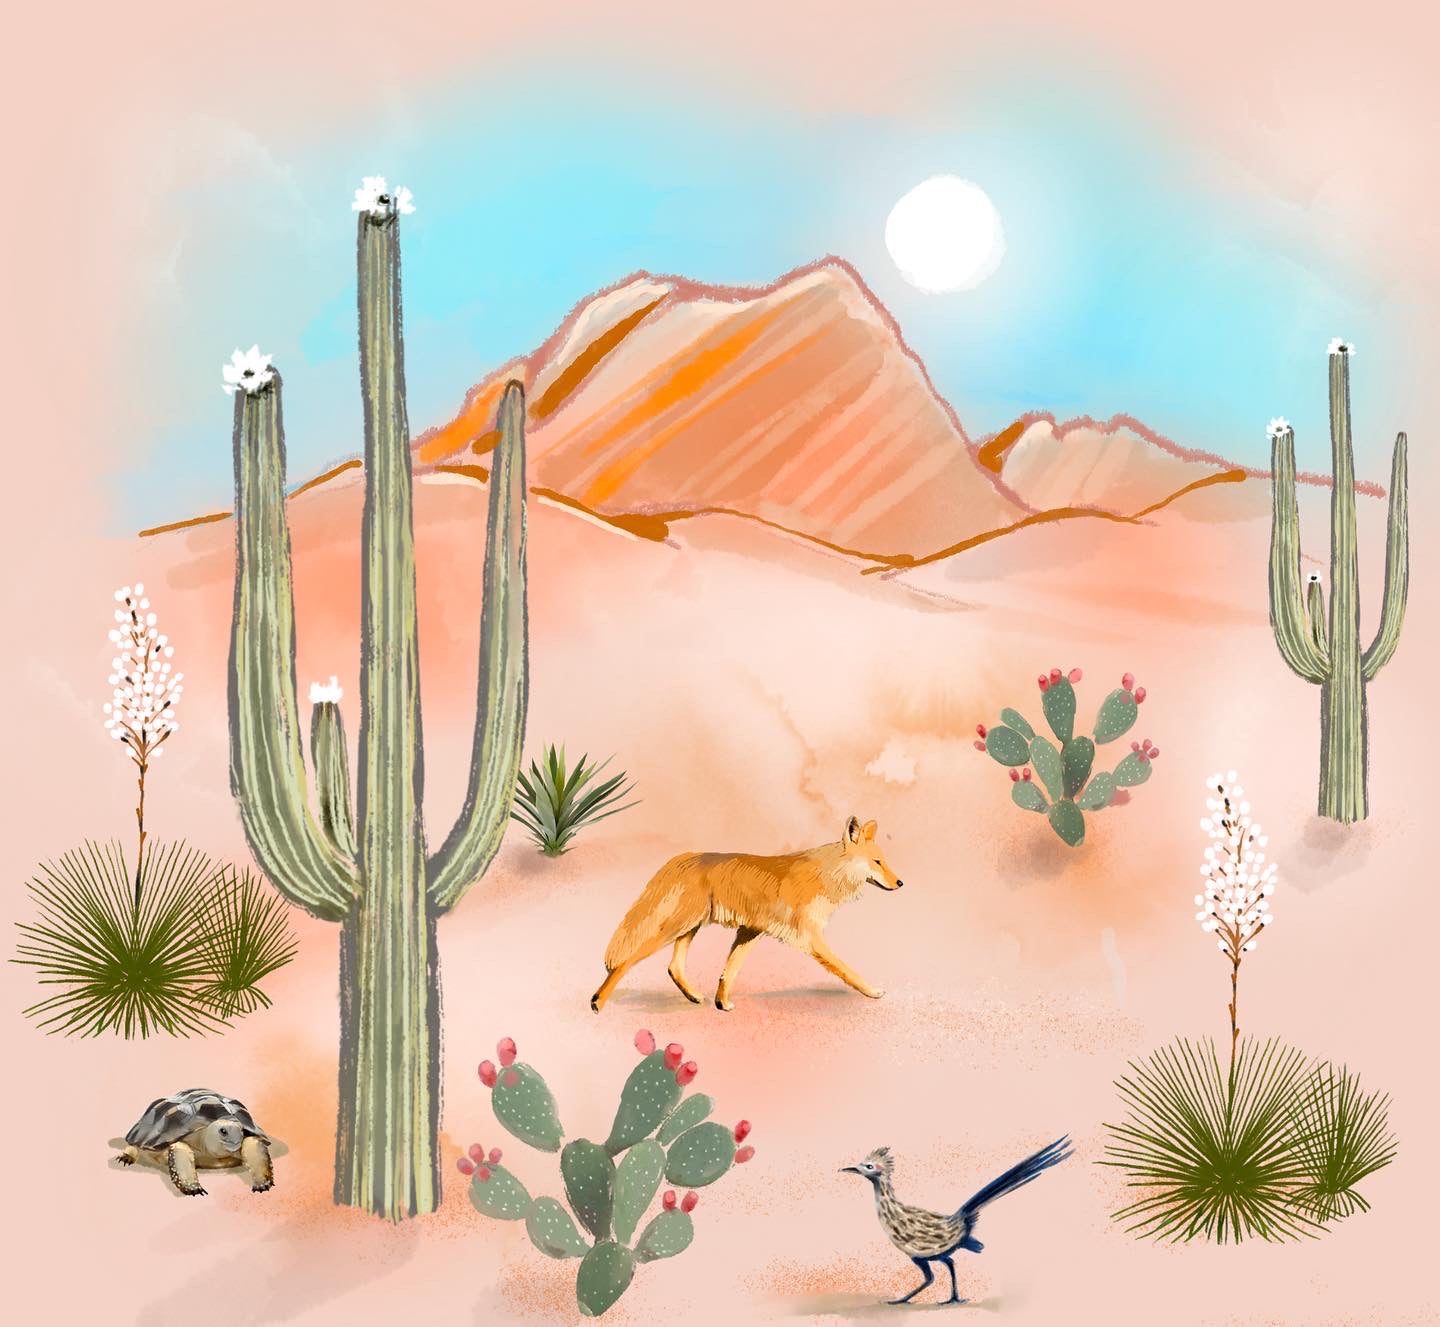 Desert Dwellers Day - Illustrated Print by Thomas Little